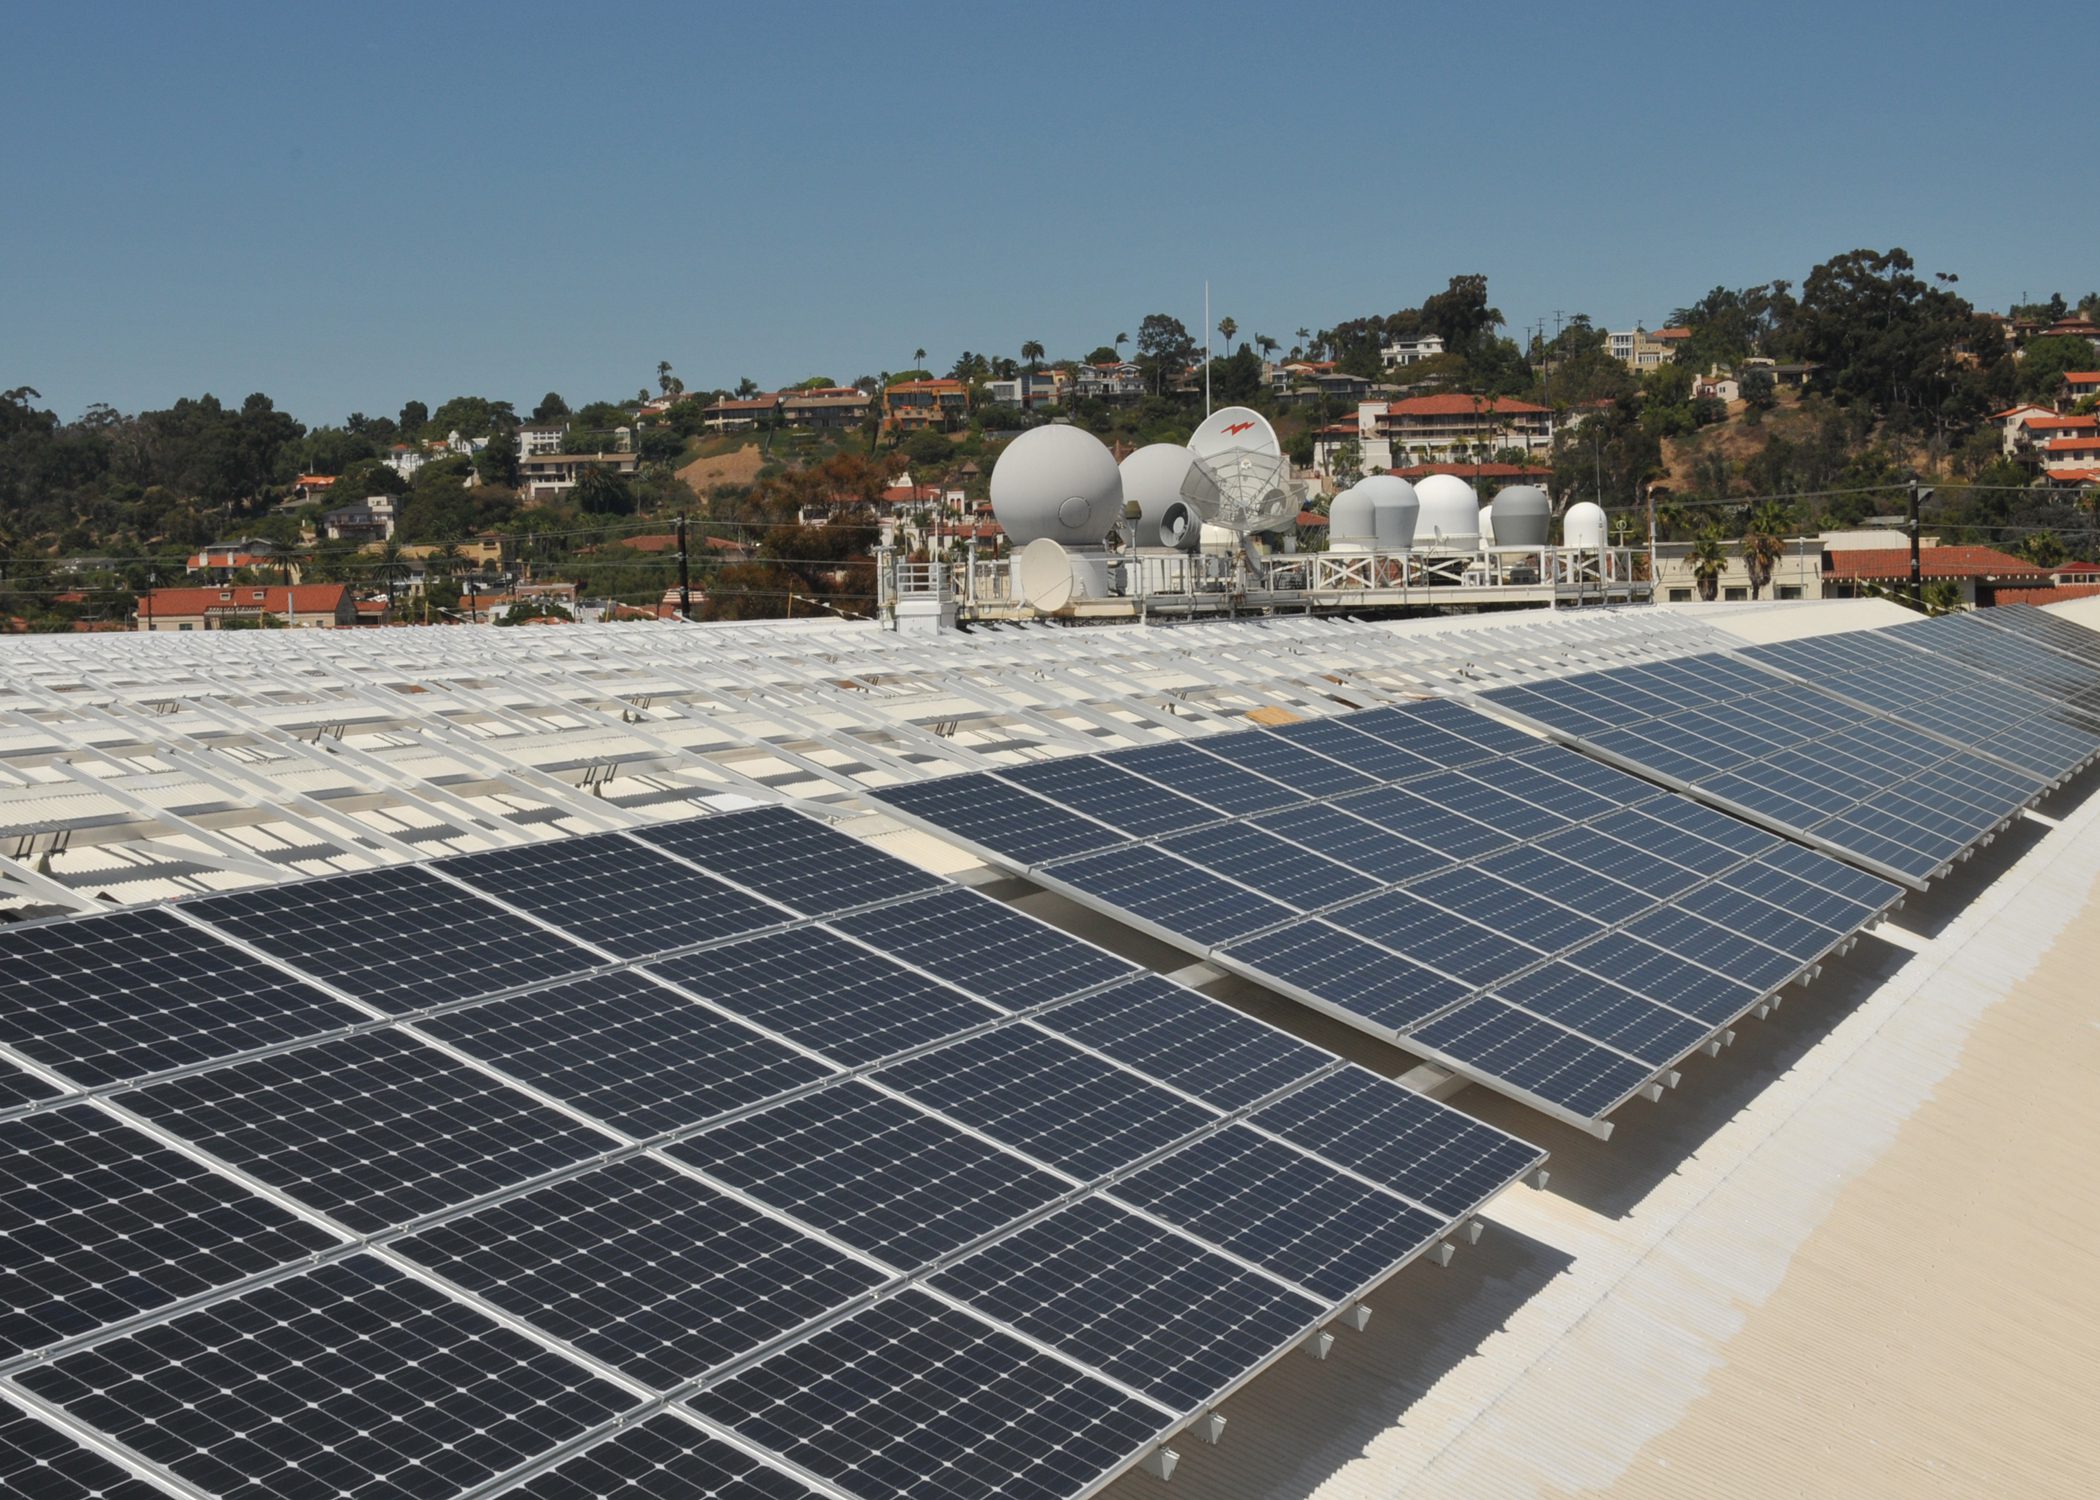 solar-is-california-s-one-beacon-of-hope-during-drought-understand-solar